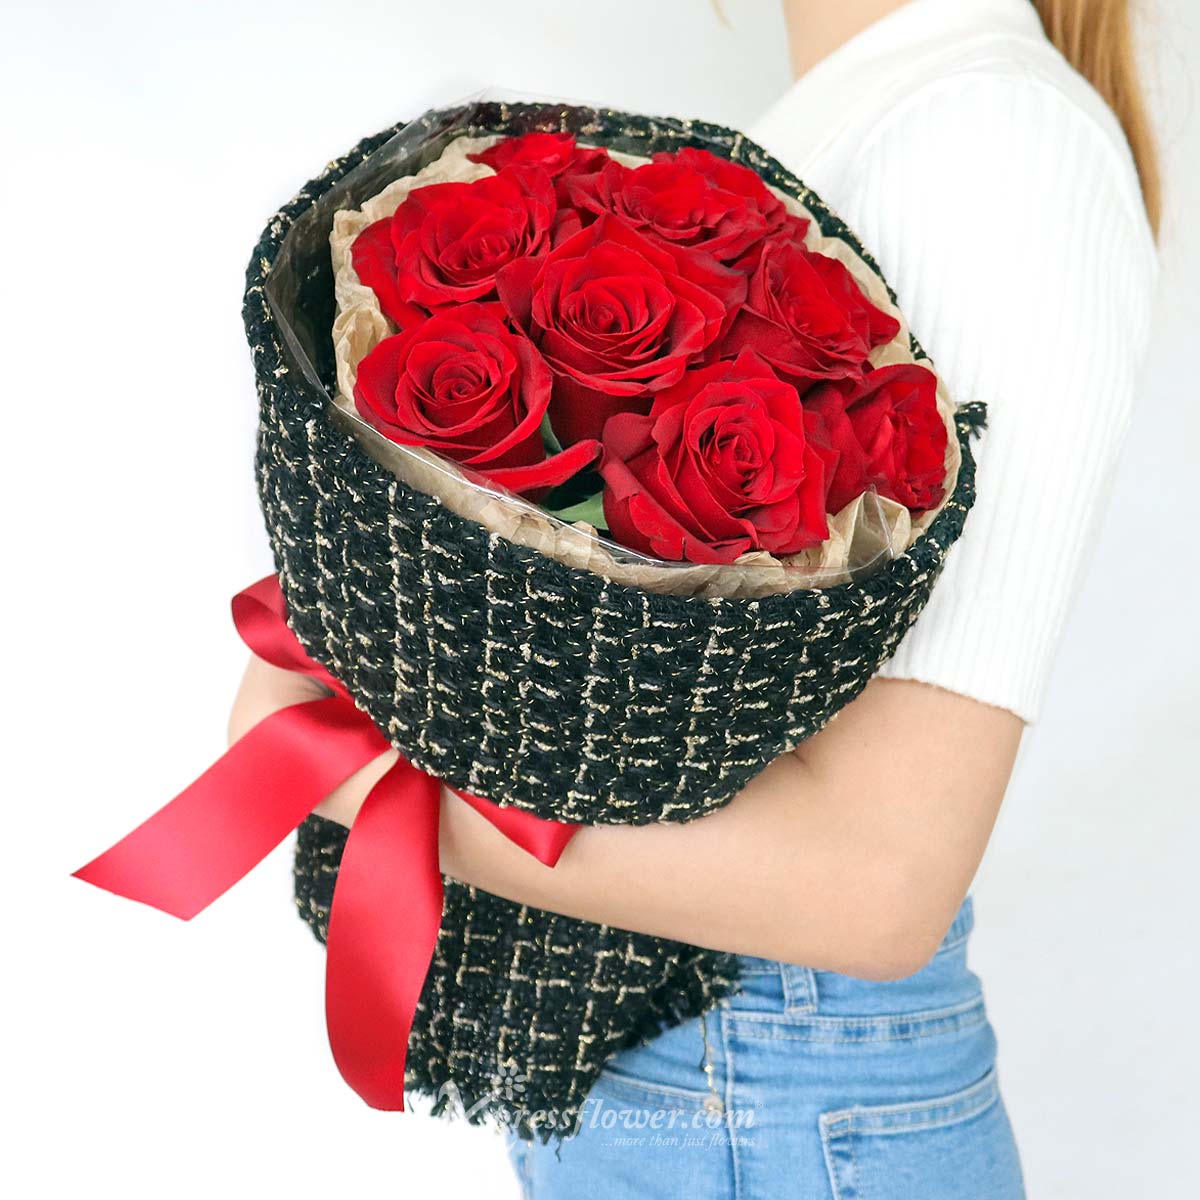 BQ2333 Amore Blossoms (10 Red Roses) 4a